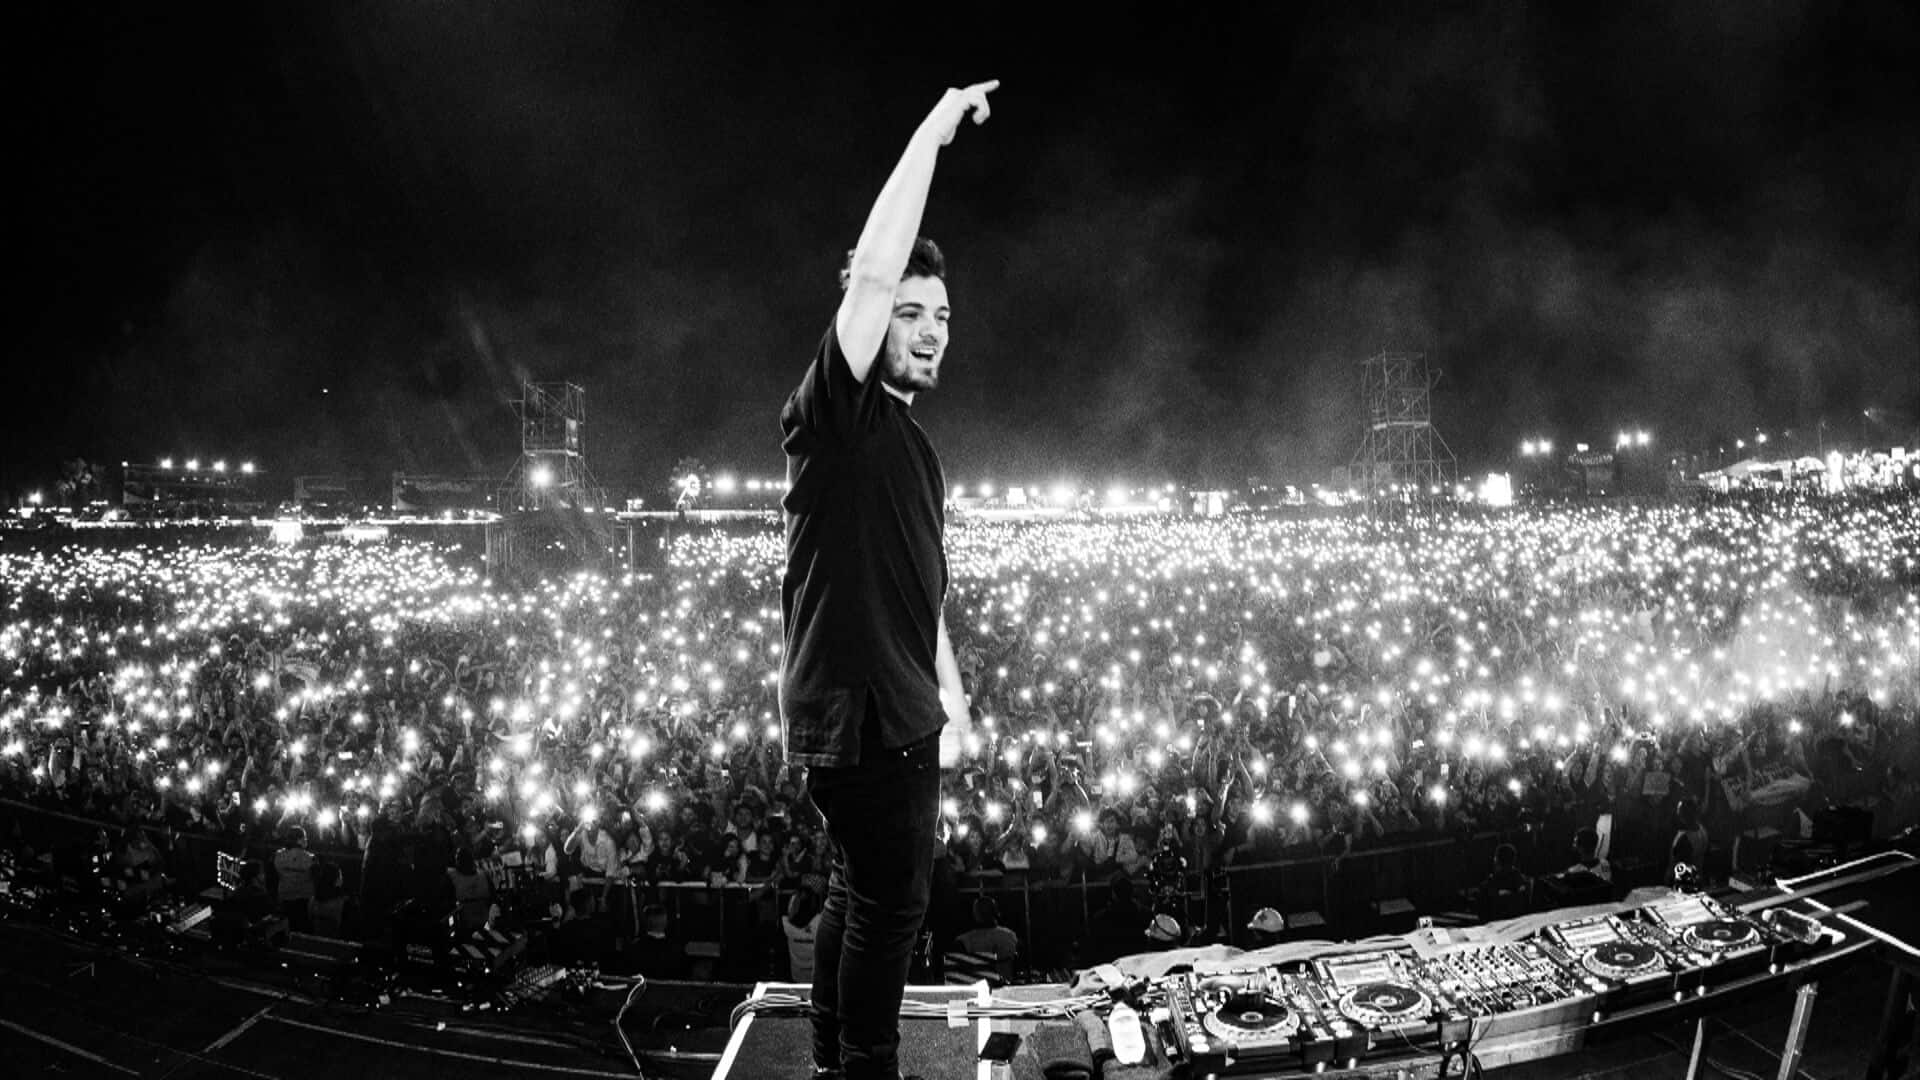 Martin Garrix had the highest grossing tour in India's history